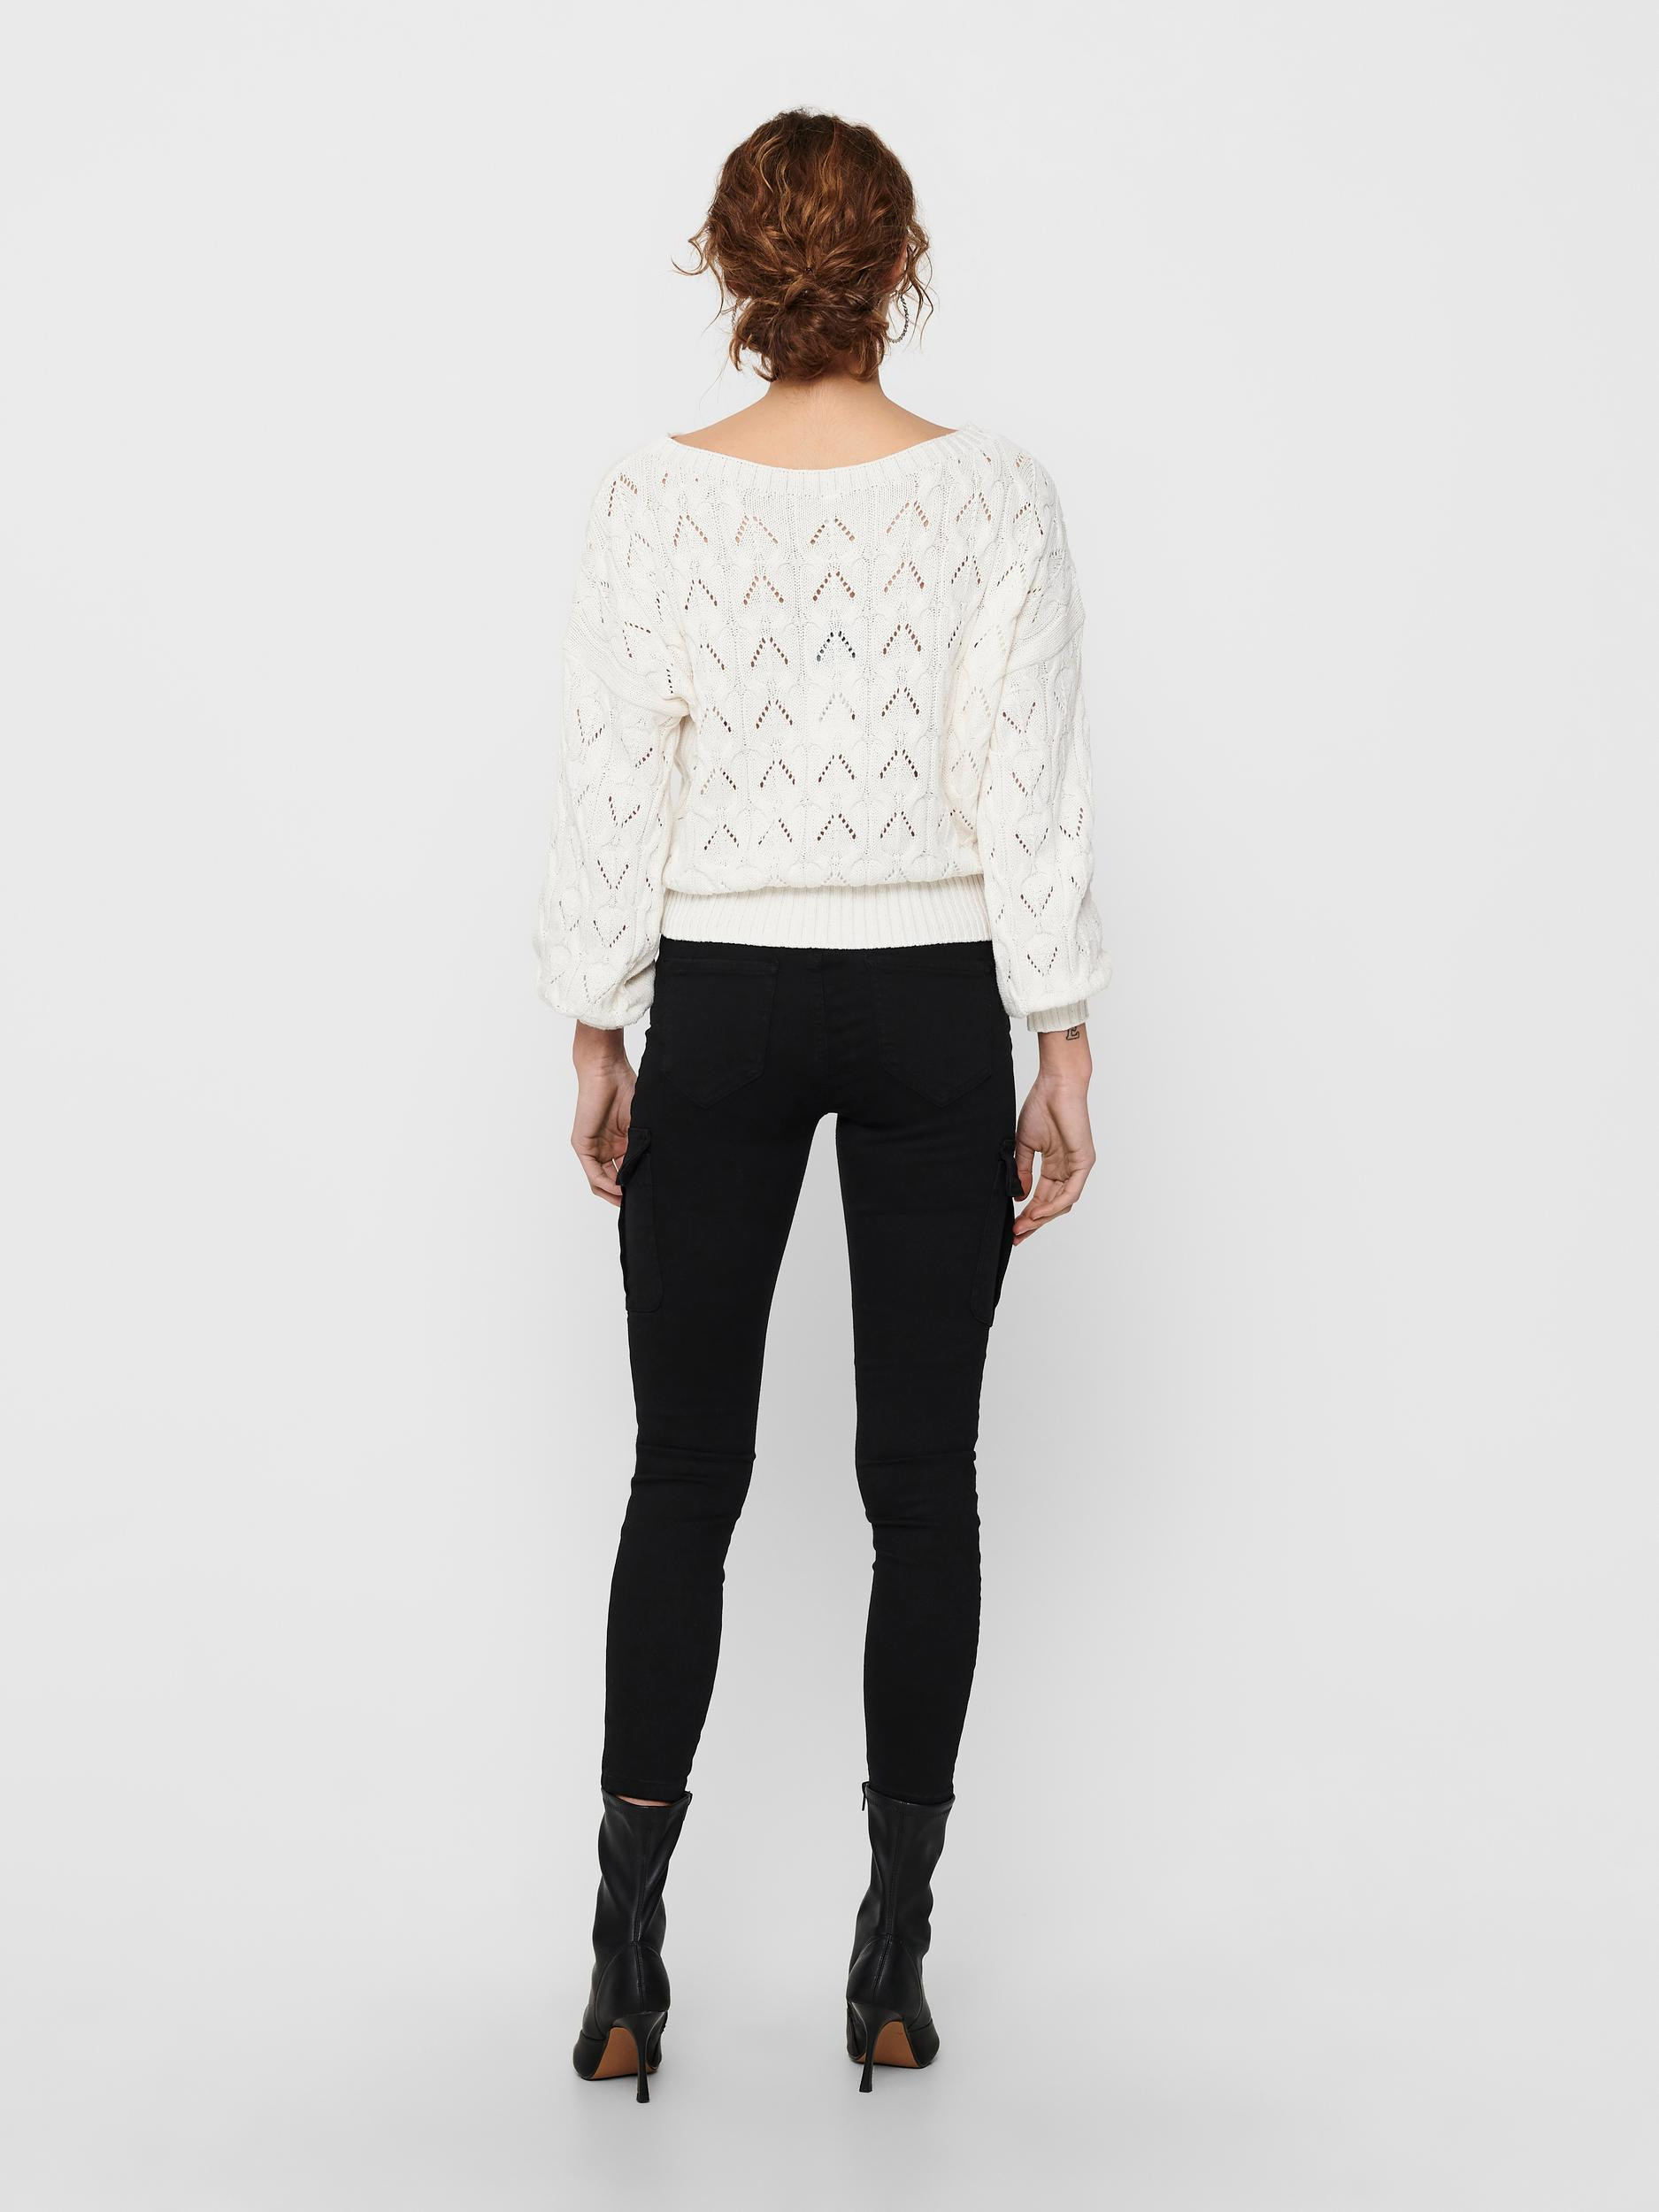 Only - Boat neck pullover with pointelle detail, White, large image number 3